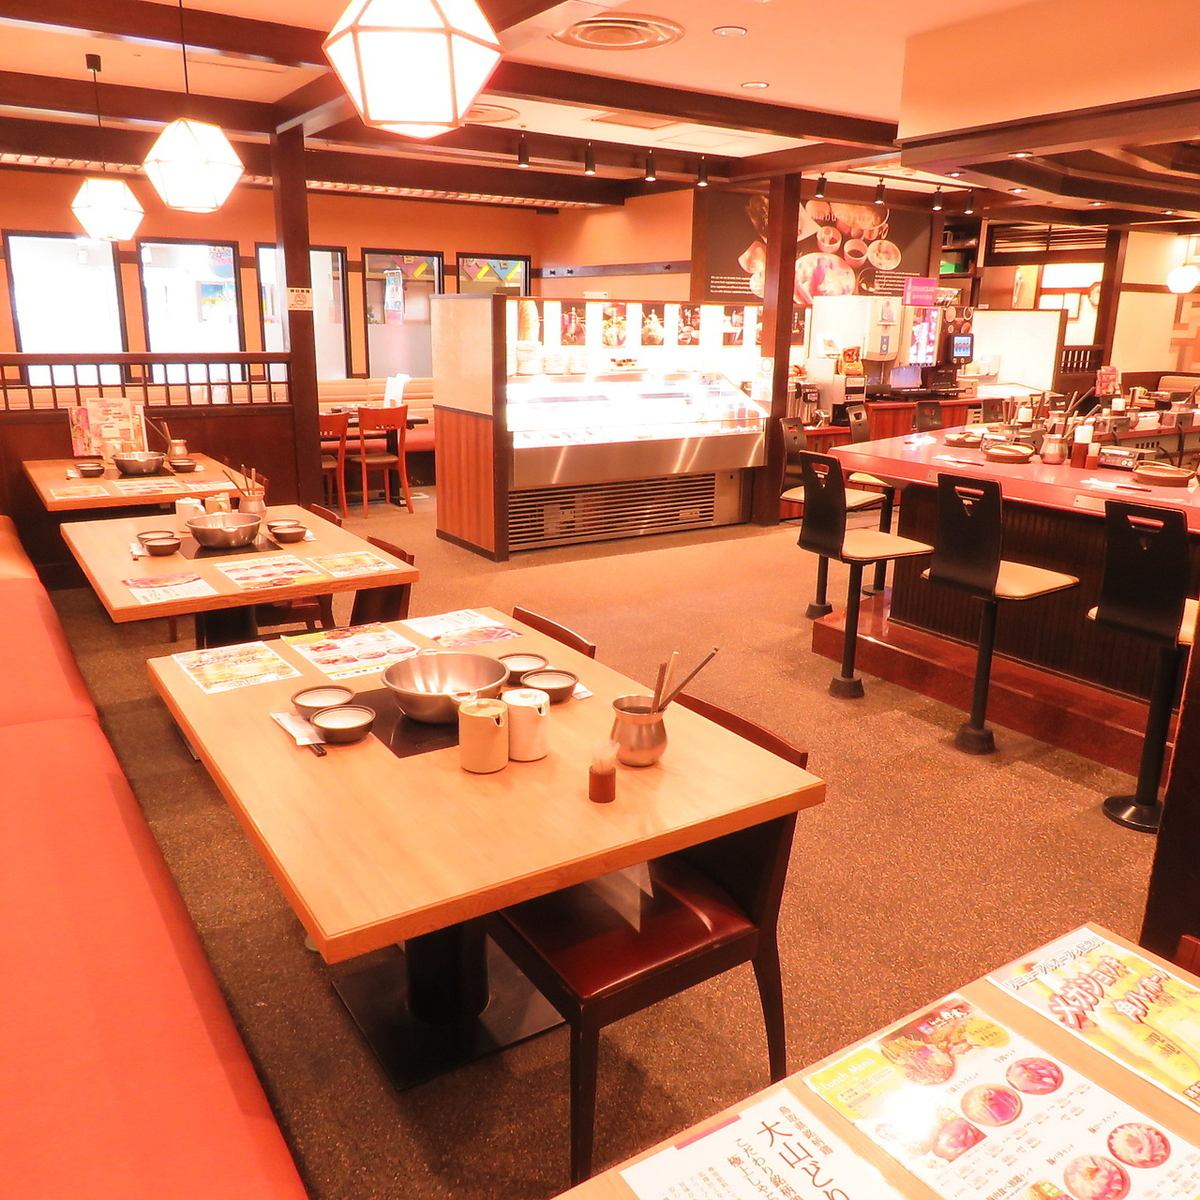 The restaurant is centered on table seats for four people, and there is also a counselor seat where you can enjoy the popular [single hot pot]!